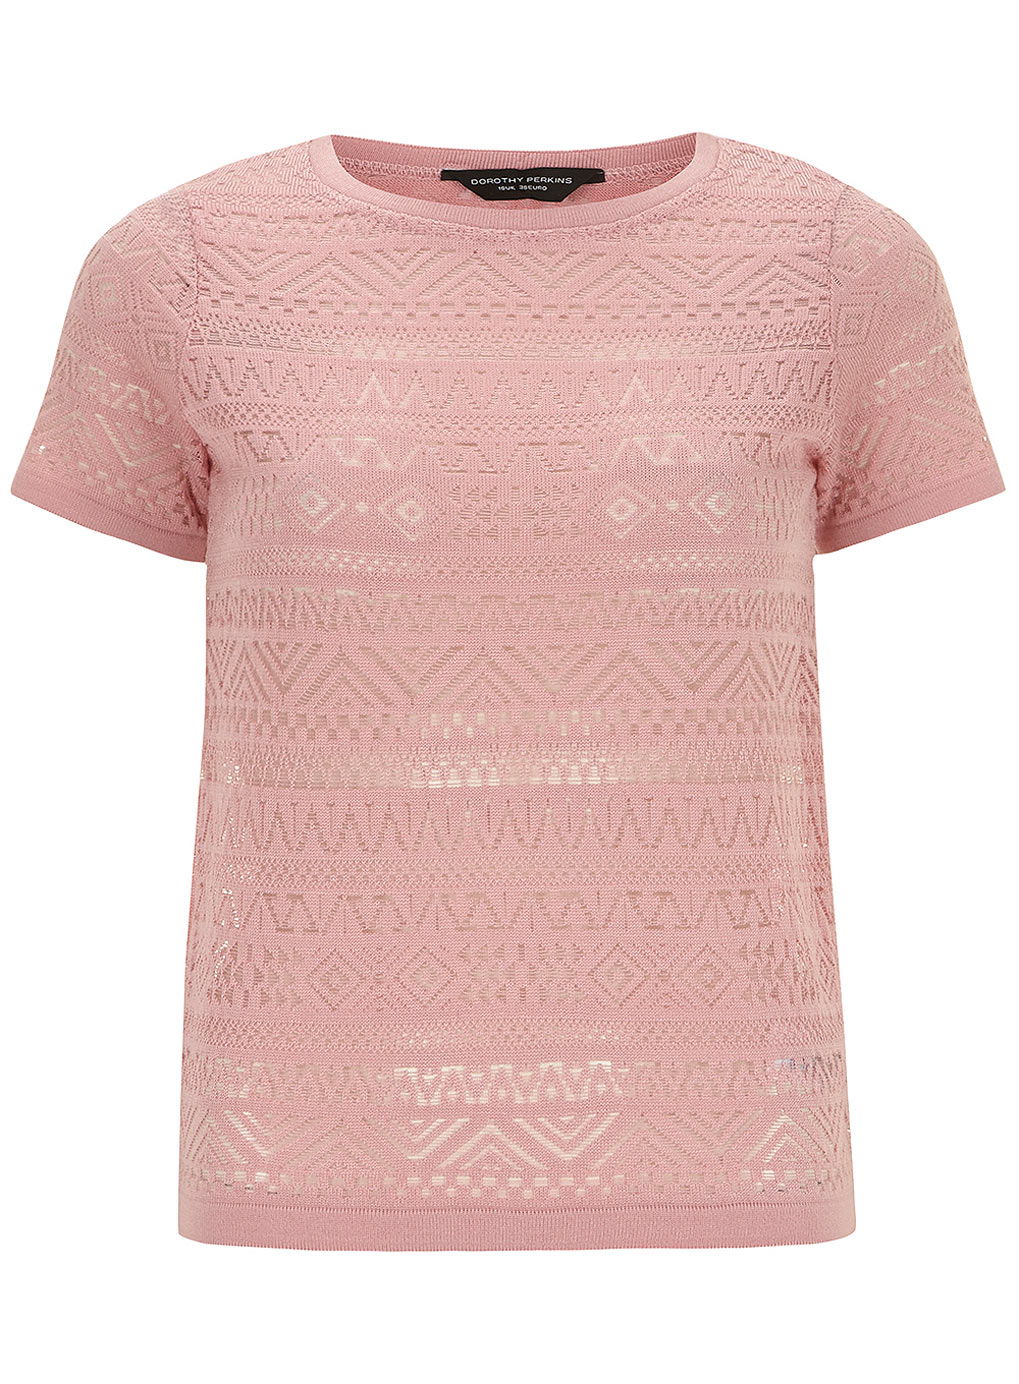 Dorothy Perkins Pink lace knitted t-shirt 55148614